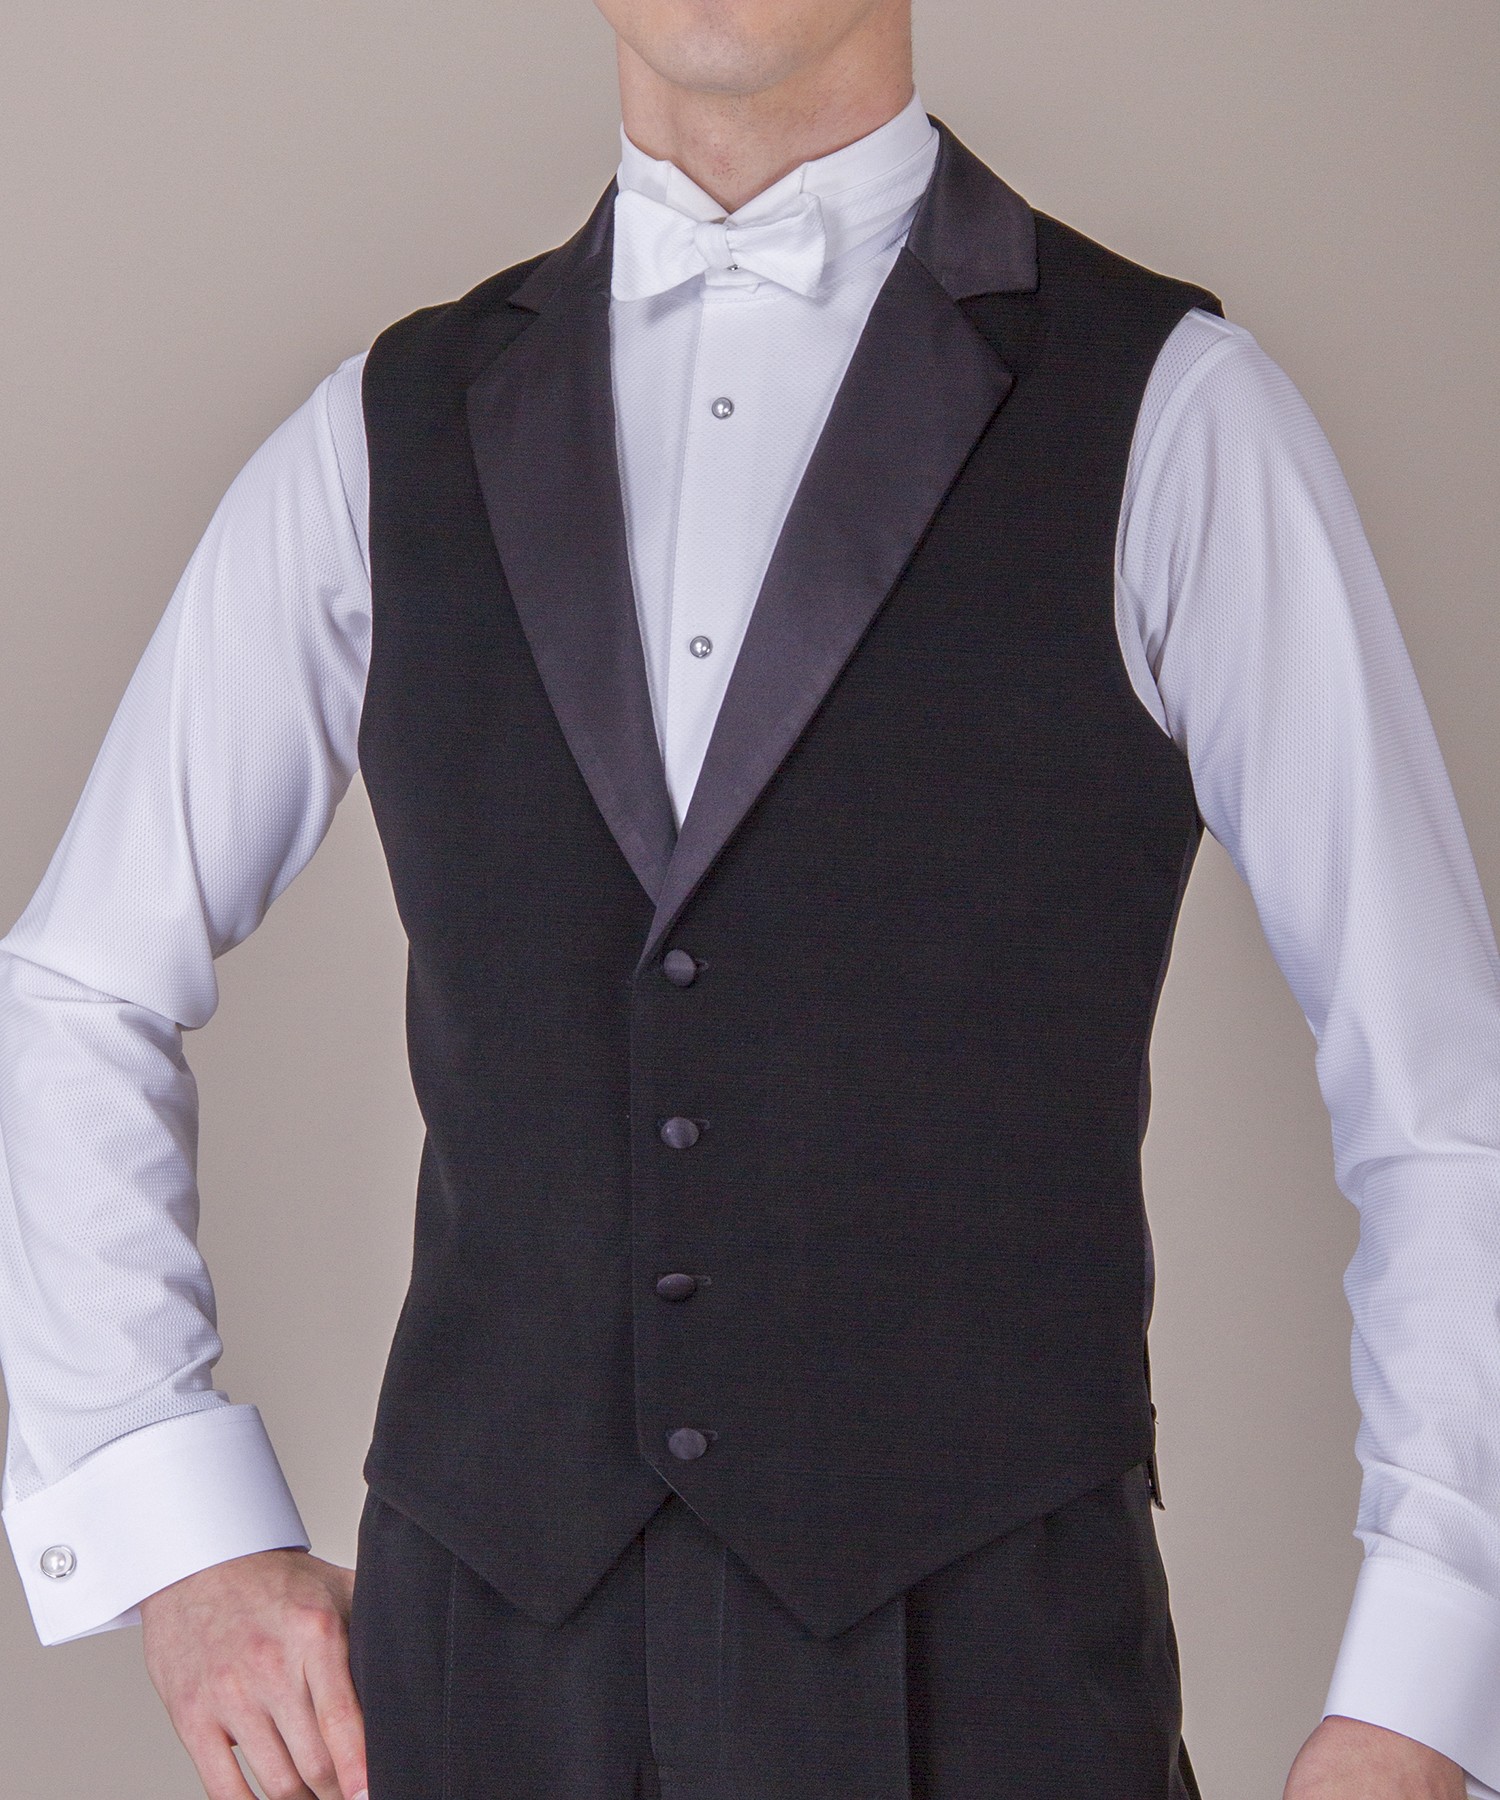 høg utilgivelig job Men's Vests and Waistcoats, DSI London, 4012 Classic Waistcoat, $165.00,  from VEdance LLC, The very best in ballroom and Latin dance shoes and  dancewear.